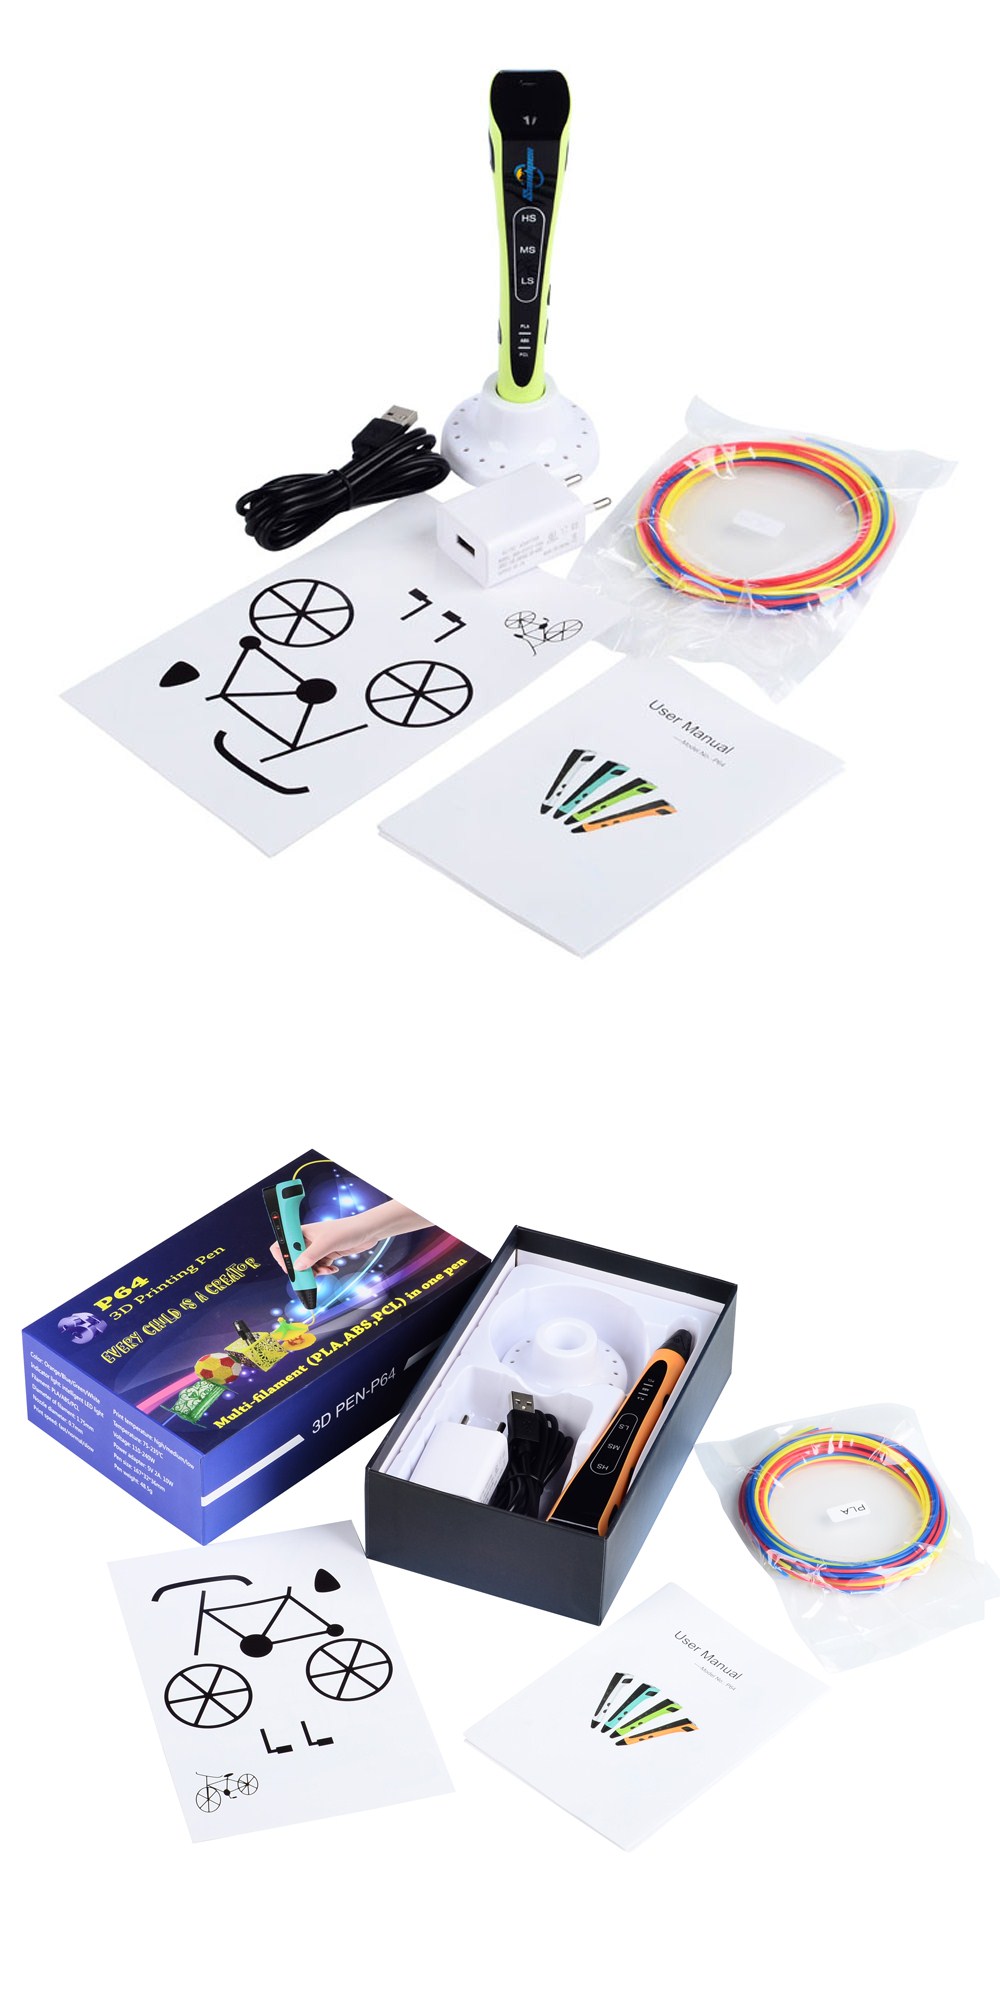 Orange/Blue/Green/White110-240V 3D Printing Pen for ABS/PLA/PCL Filament Support Adjustable Speed 17